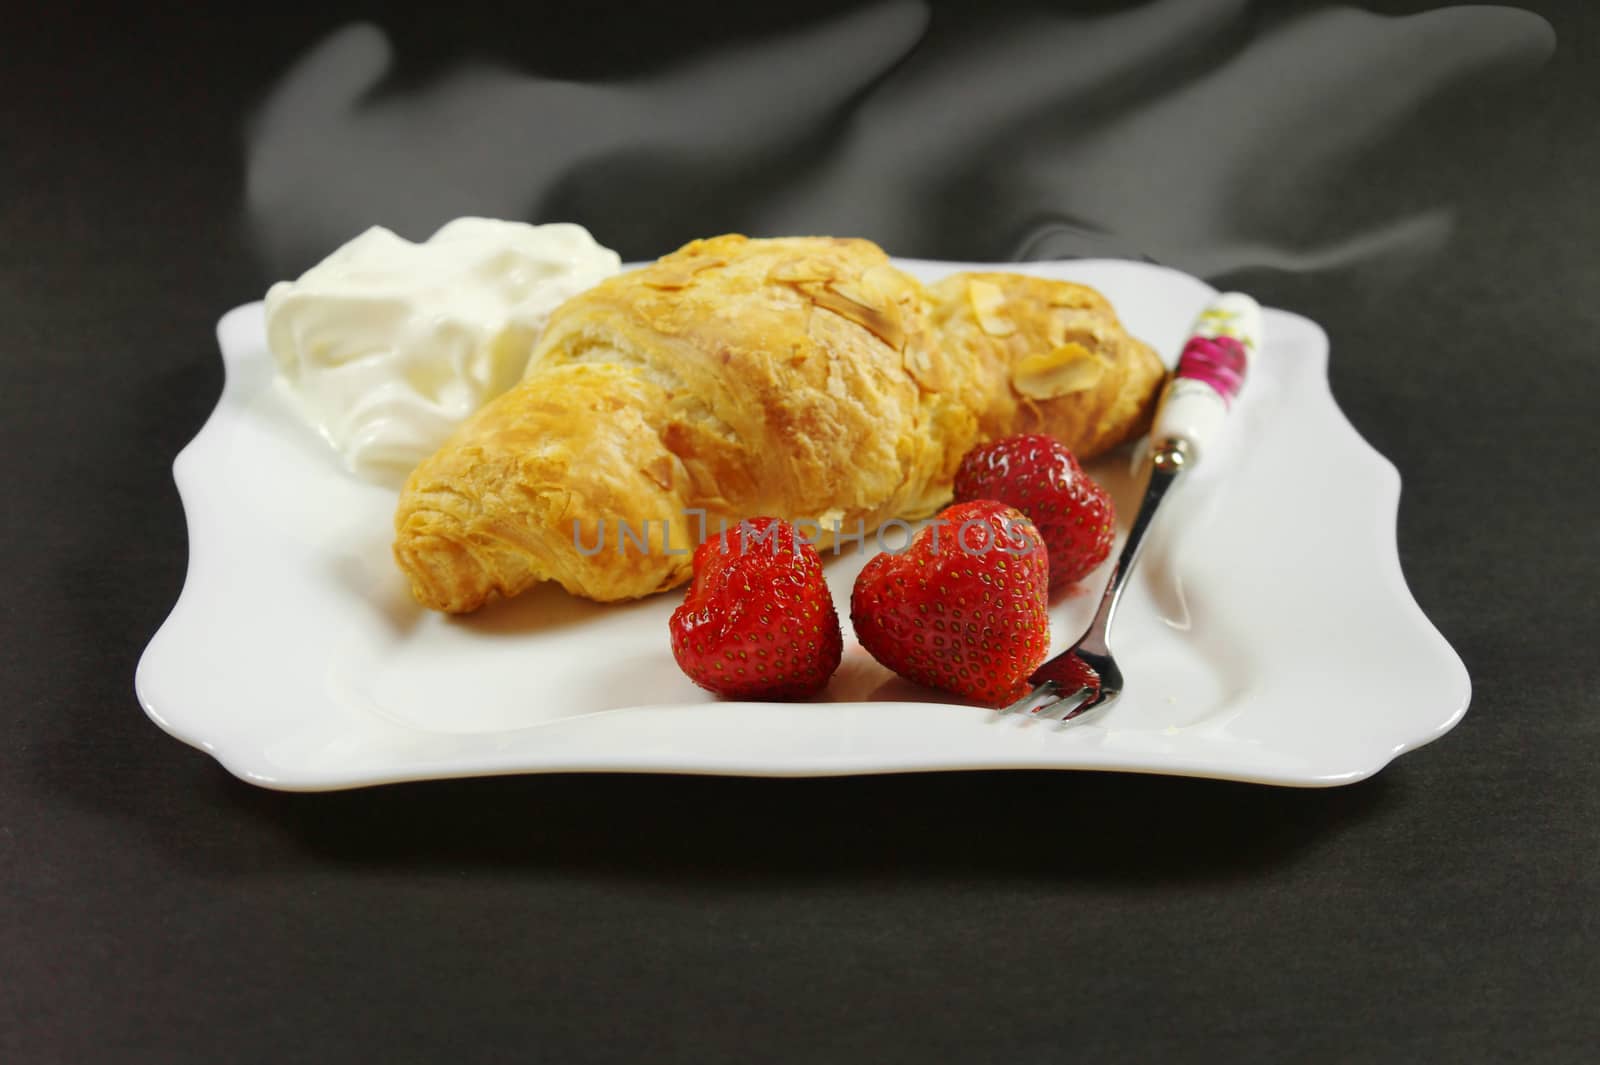 hot croissant with a strawberries on plate against the black background